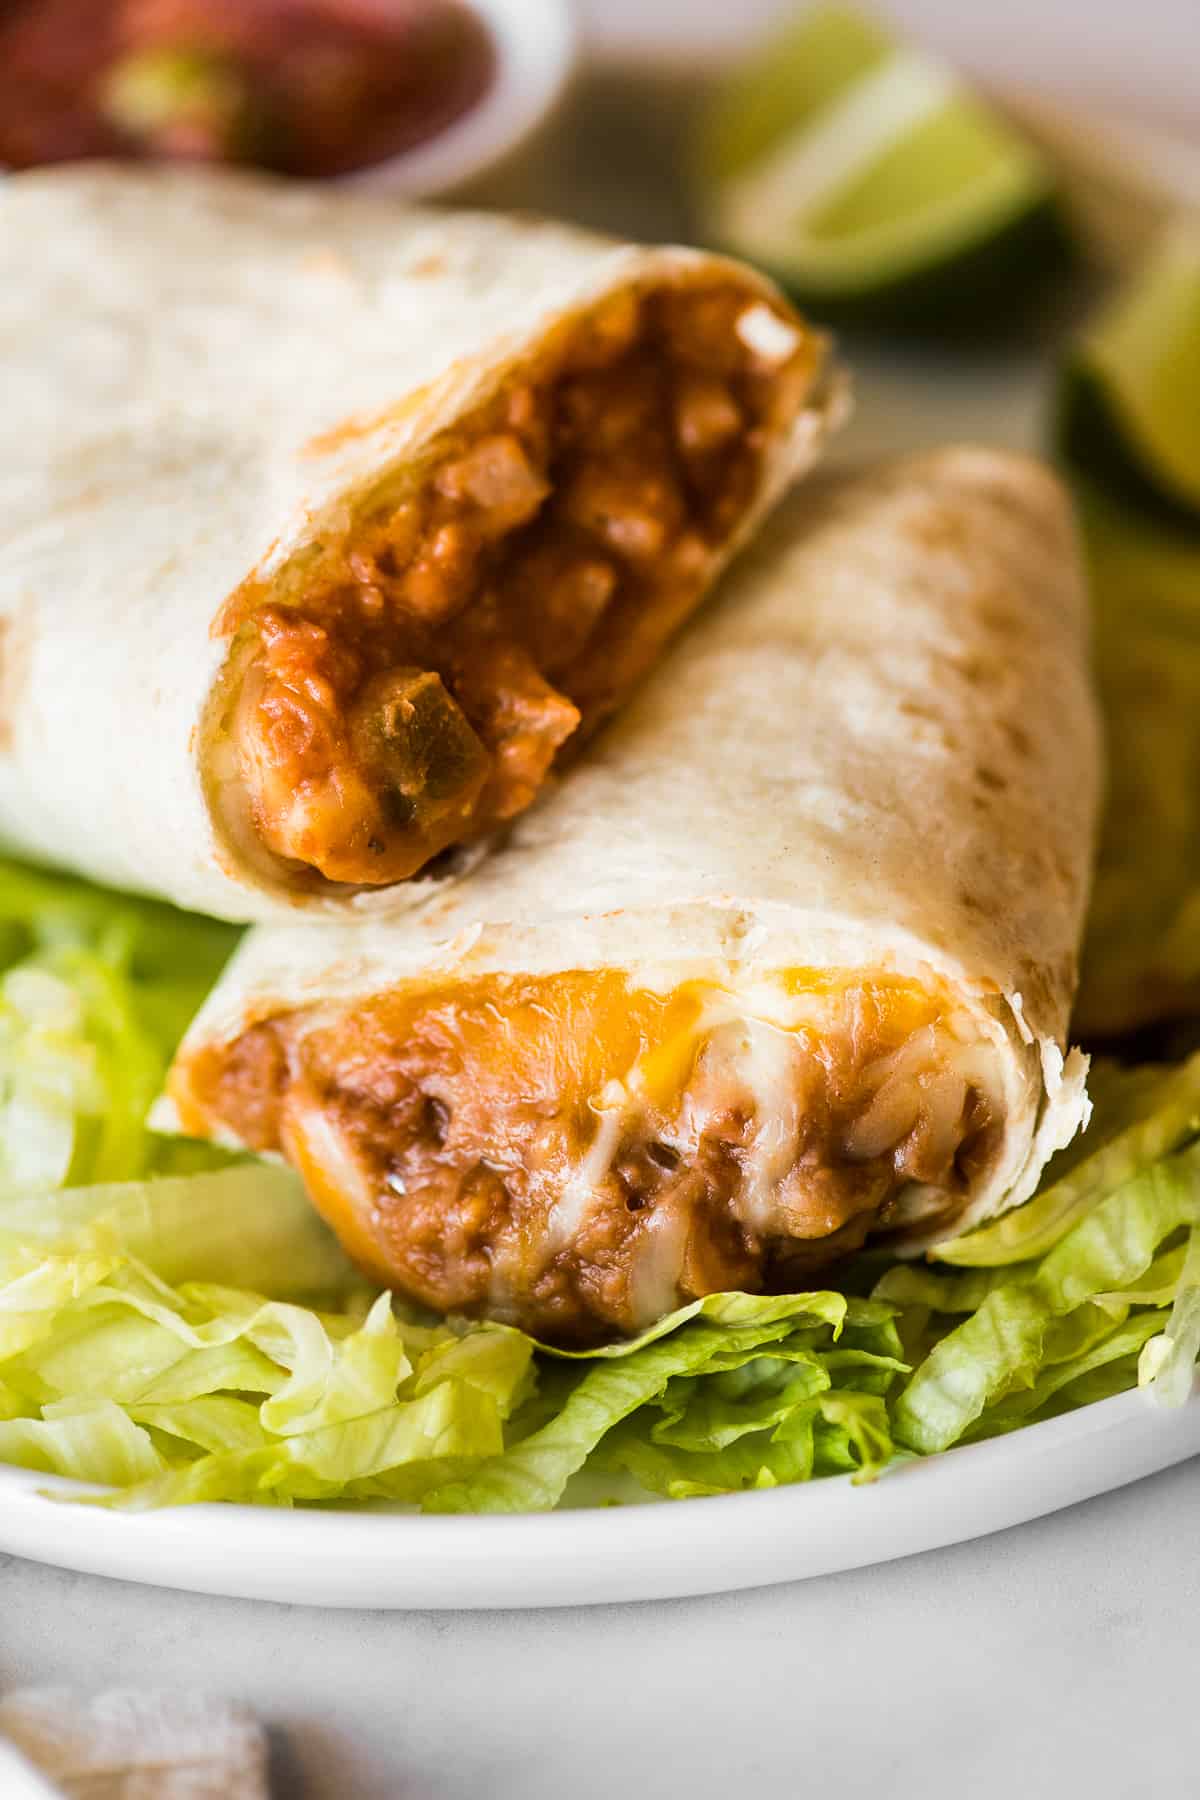 A bean and cheese burrito on a bed of shredded lettuce.